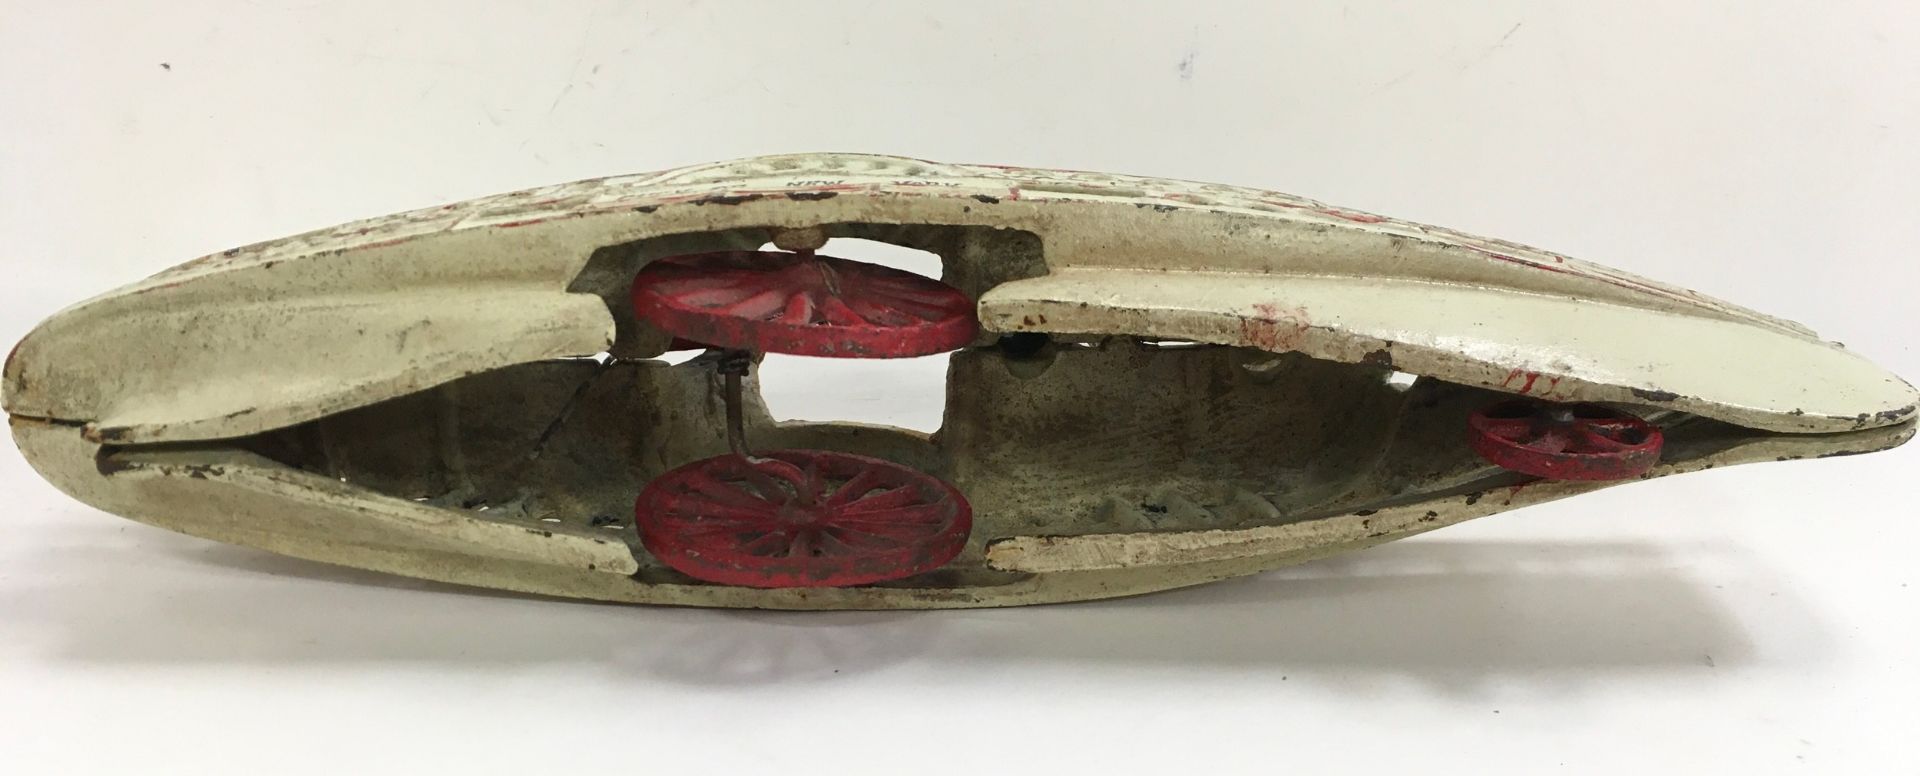 Cast Iron model of a paddle boat, believed to be Wilkins. - Image 3 of 4